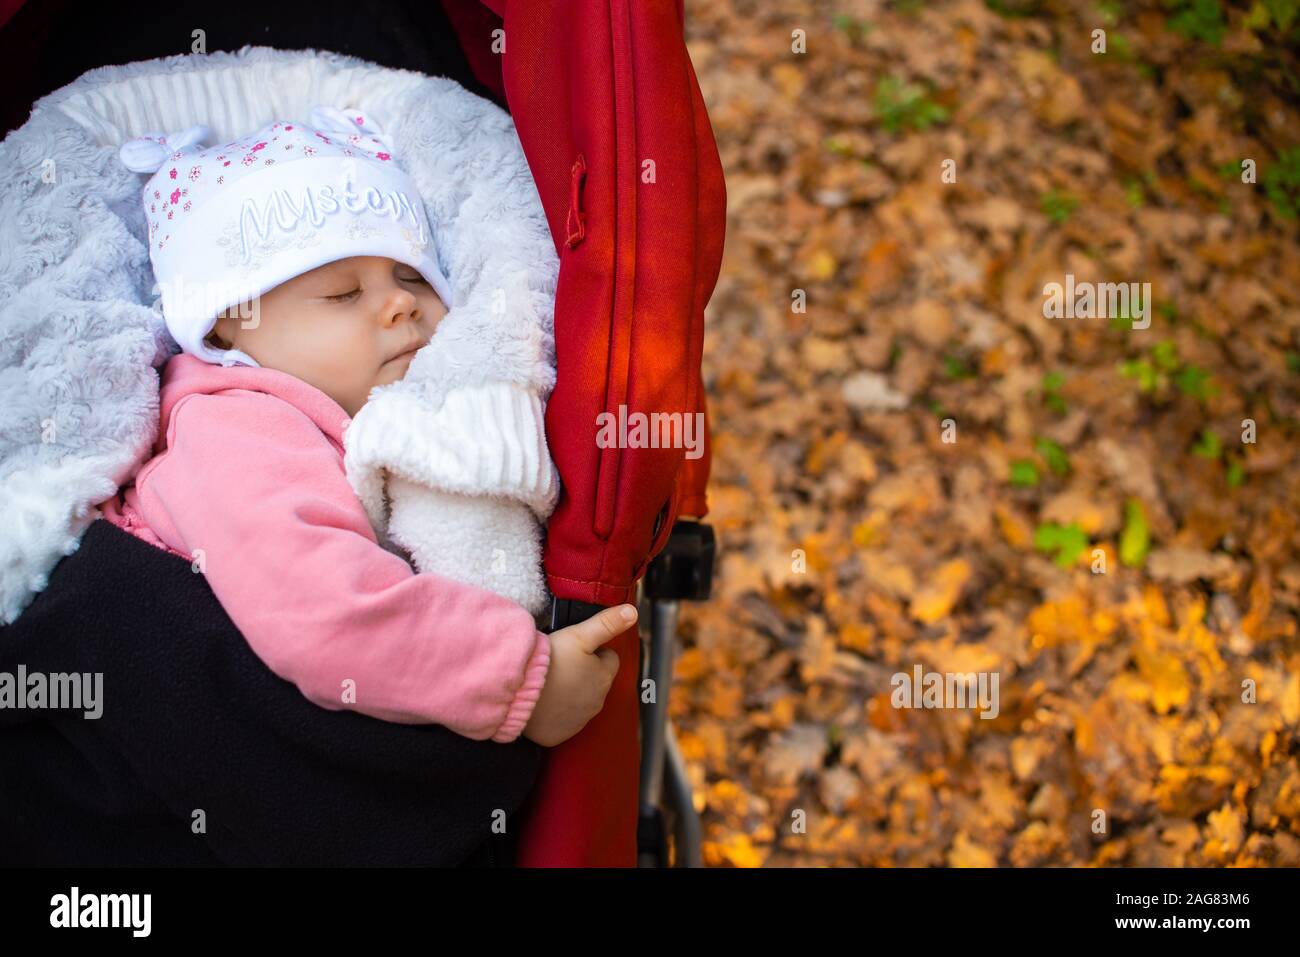 Adorable baby girl outside in red stroller sleeps in autumn sunny day. Autumn leafs on the ground background. Stock Photo